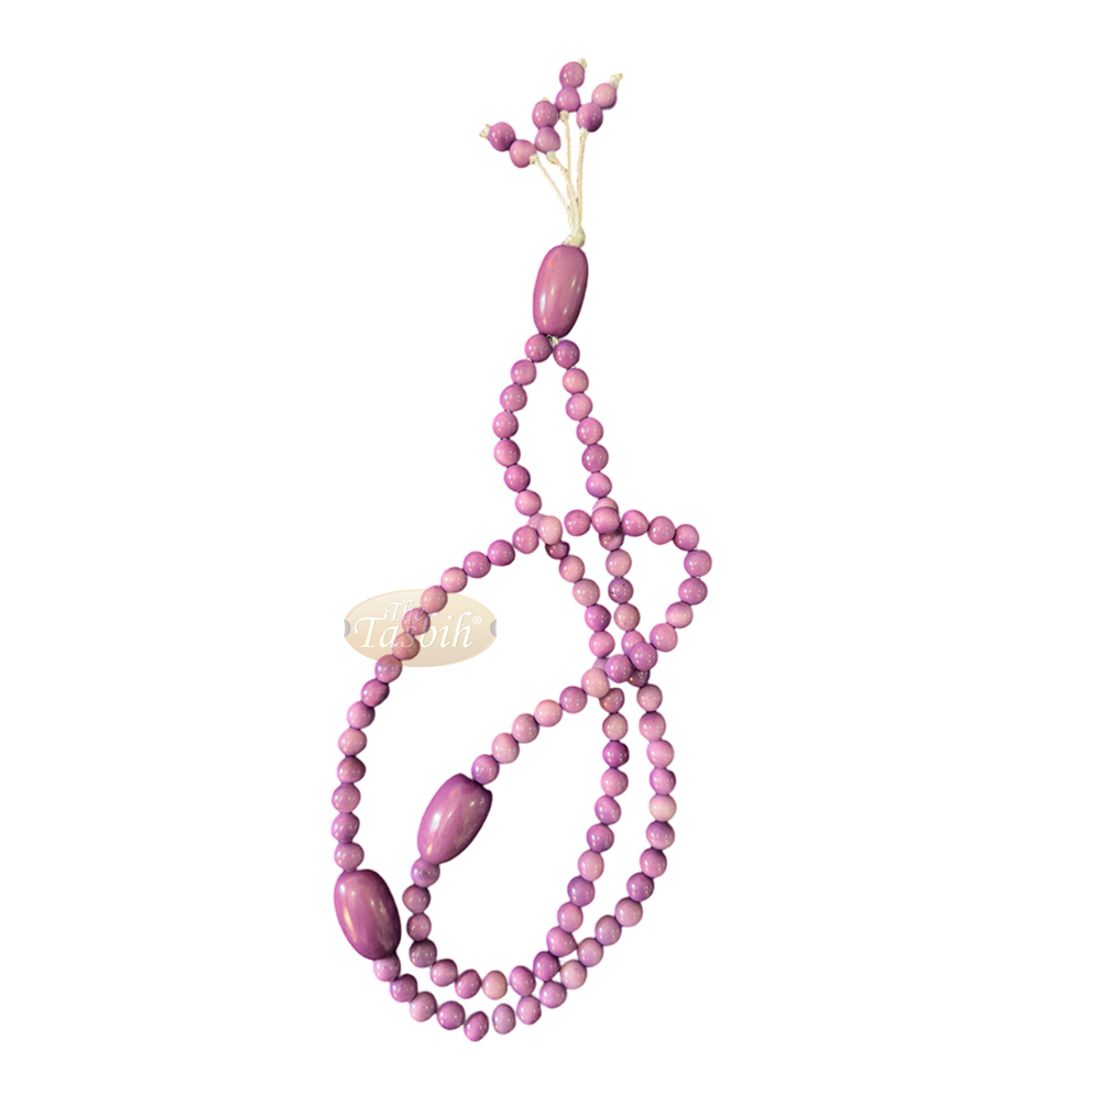 Light Purple Natural Colored Dye Eco-friendly Sustainable Original Açai Seed 9mm Beads Traditional Tasbih